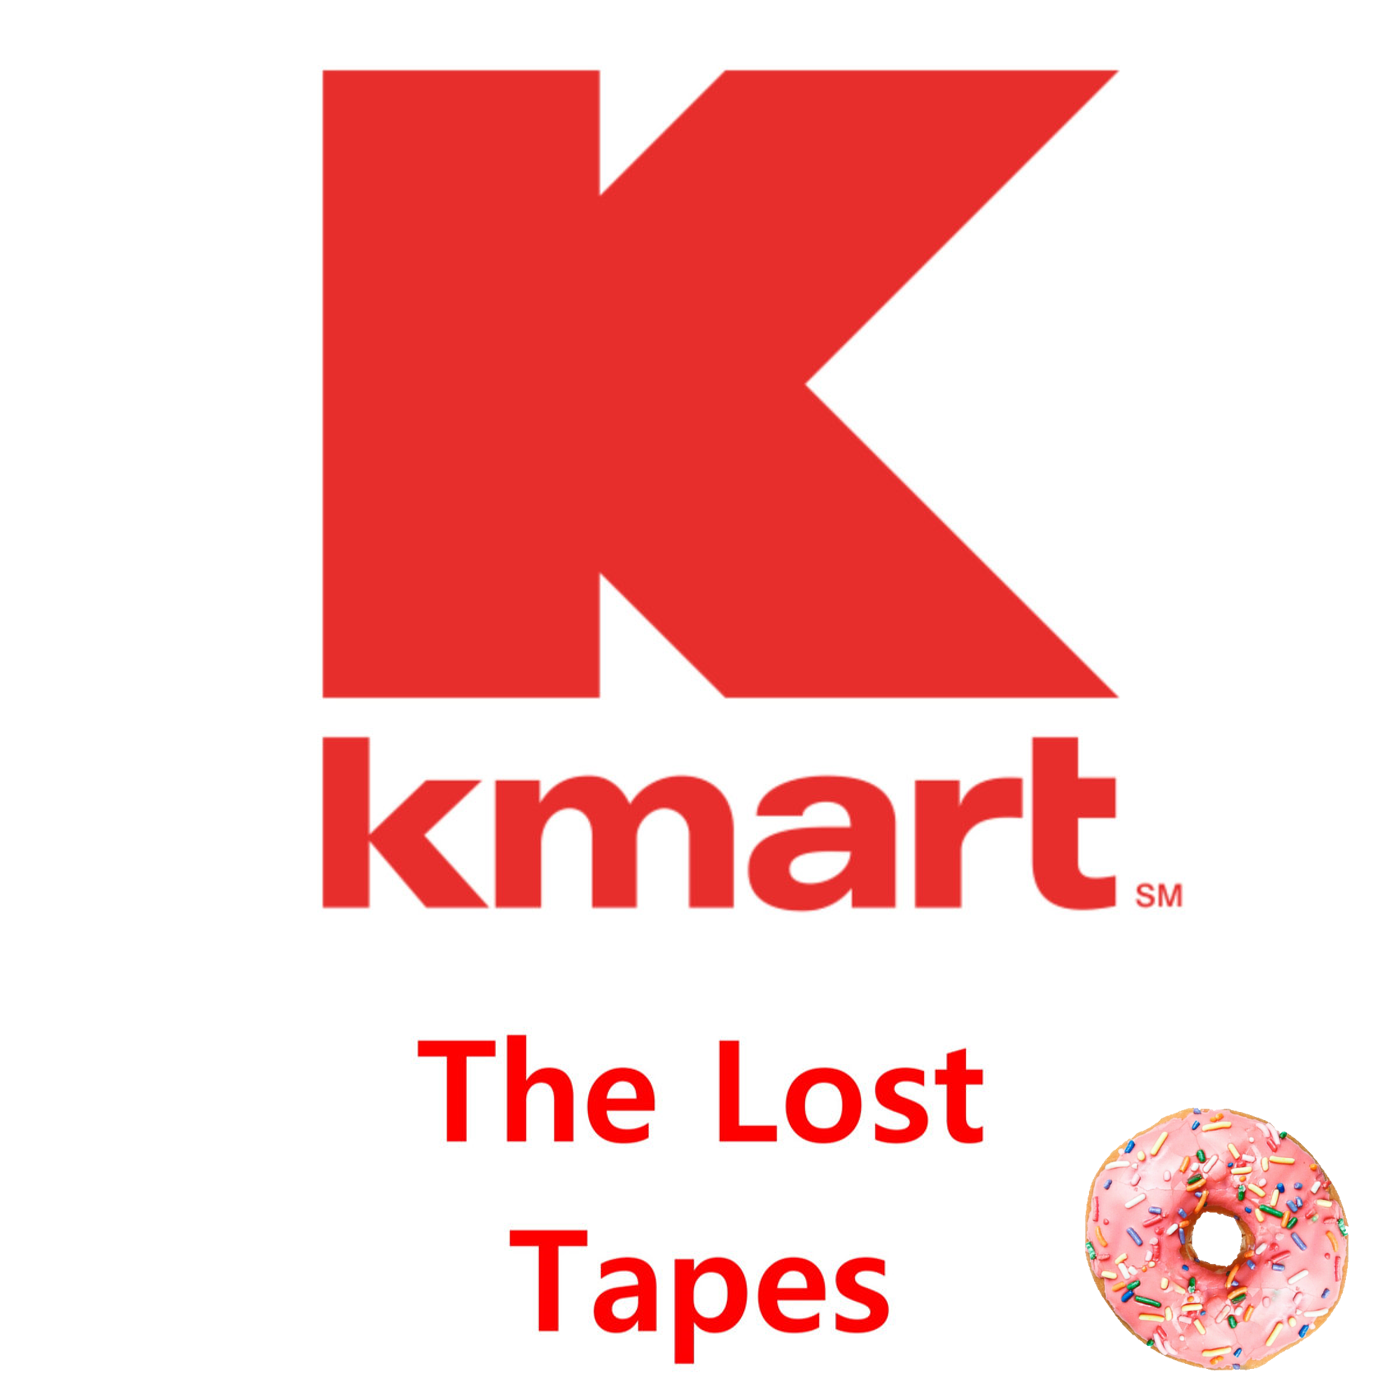 Kmart - The Lost Tapes